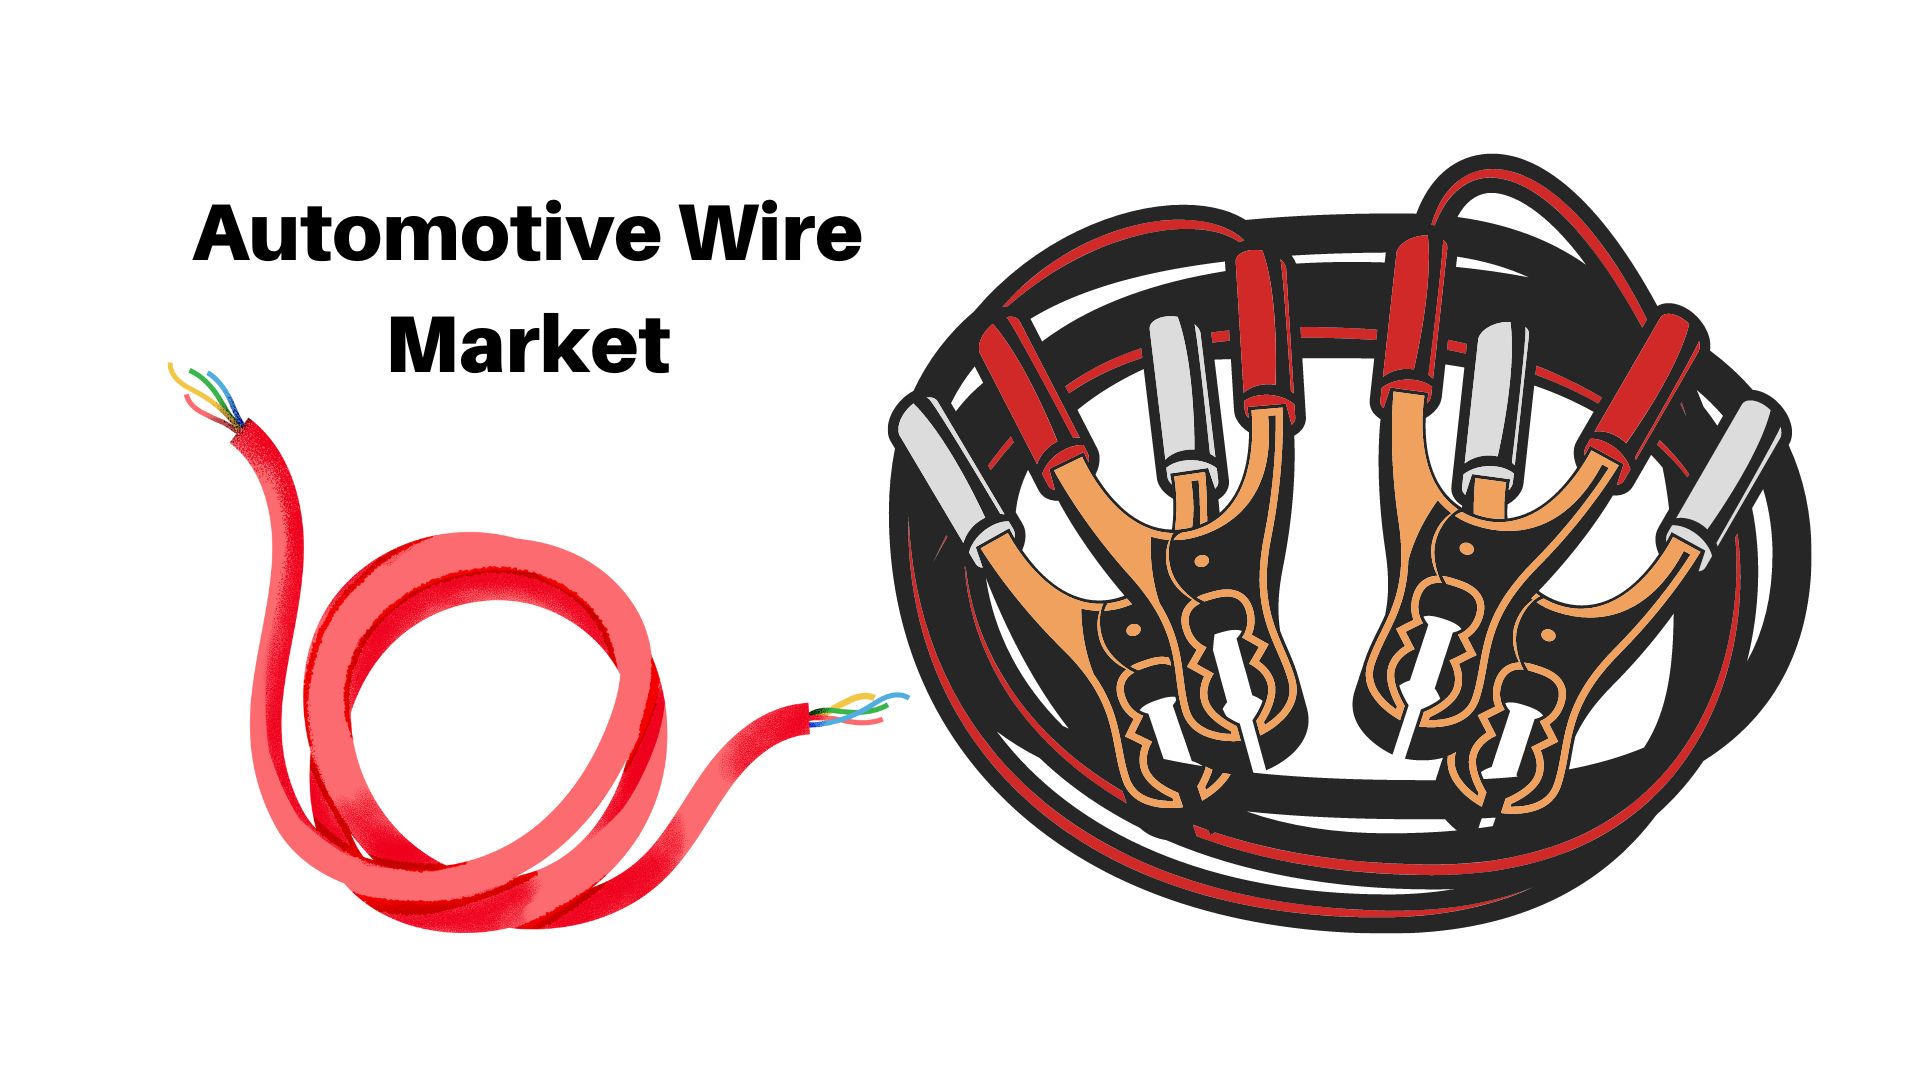 Automotive Wire Market Size Will Reach USD 8.55 Billion by the end of 2032